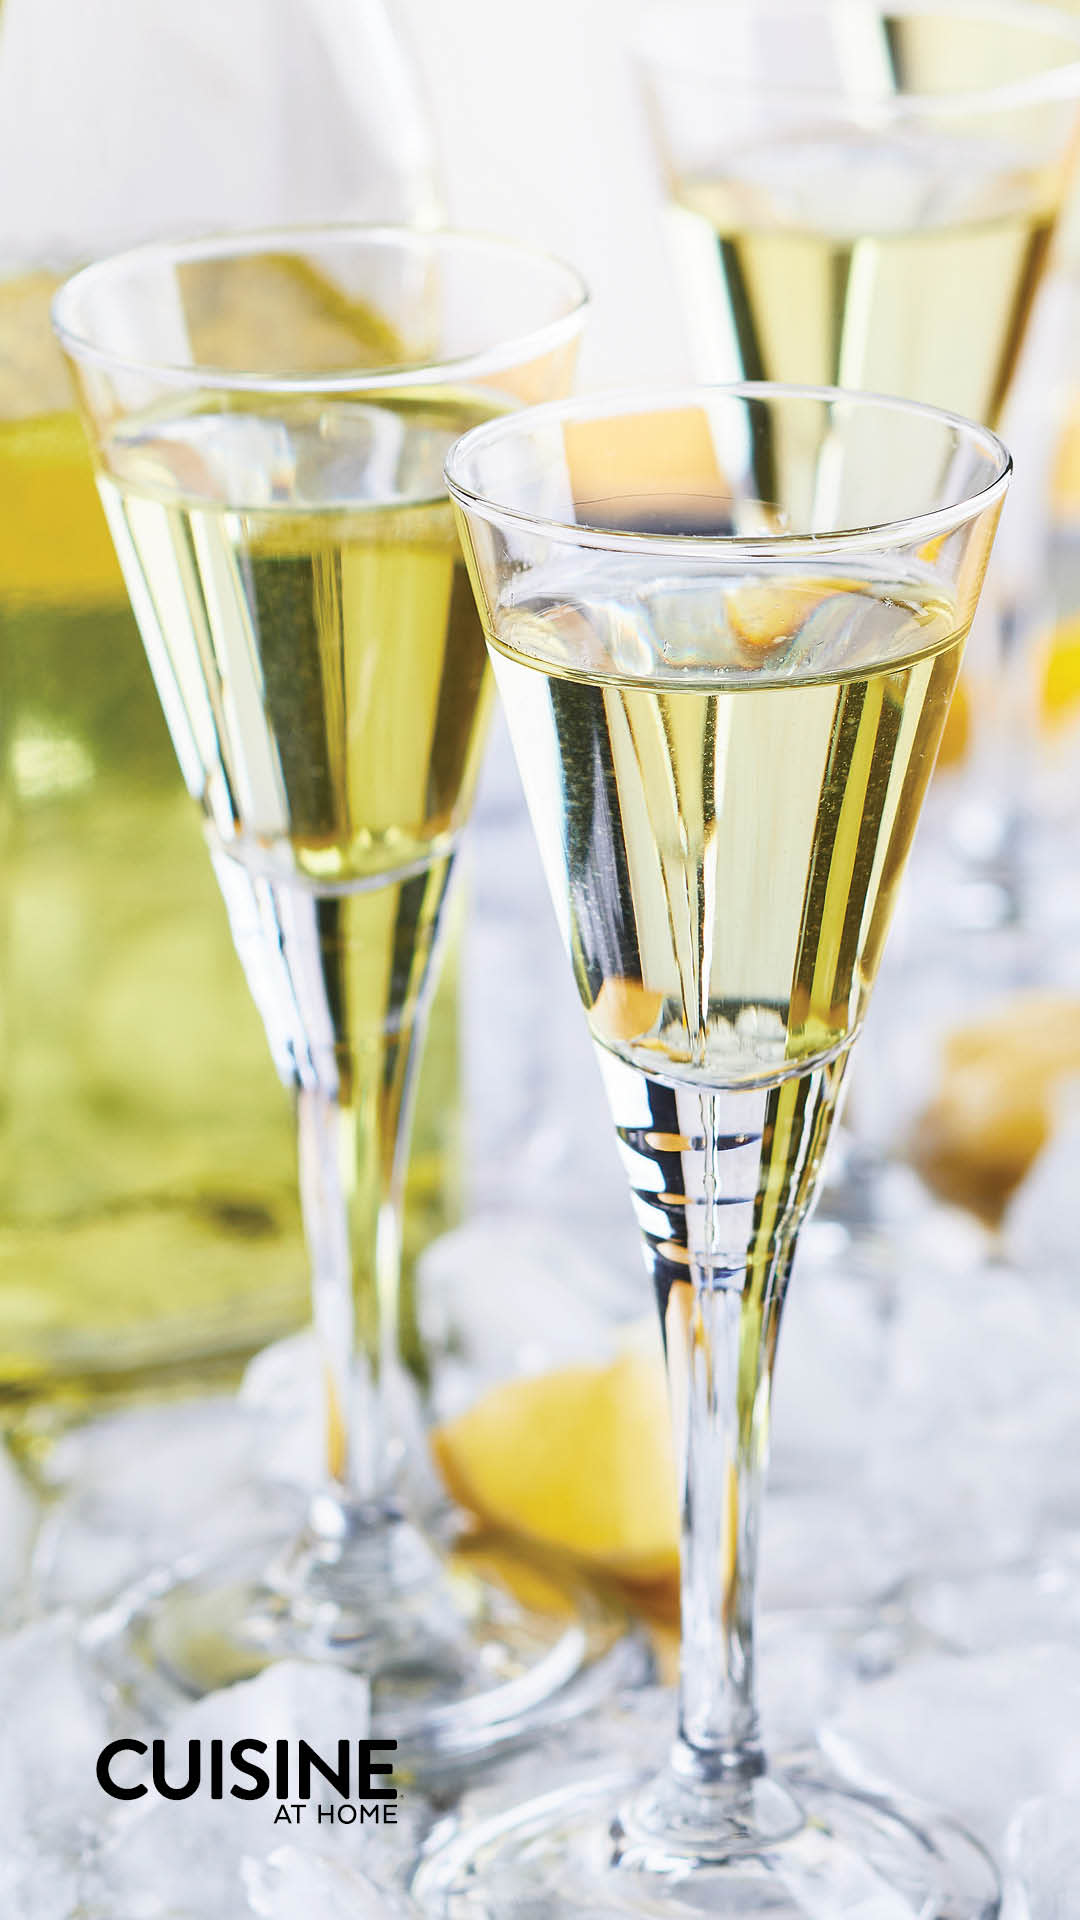 Free New Years Champagne Holiday Aesthetic Mobile wallpaper iPhone Android Cuisine at home